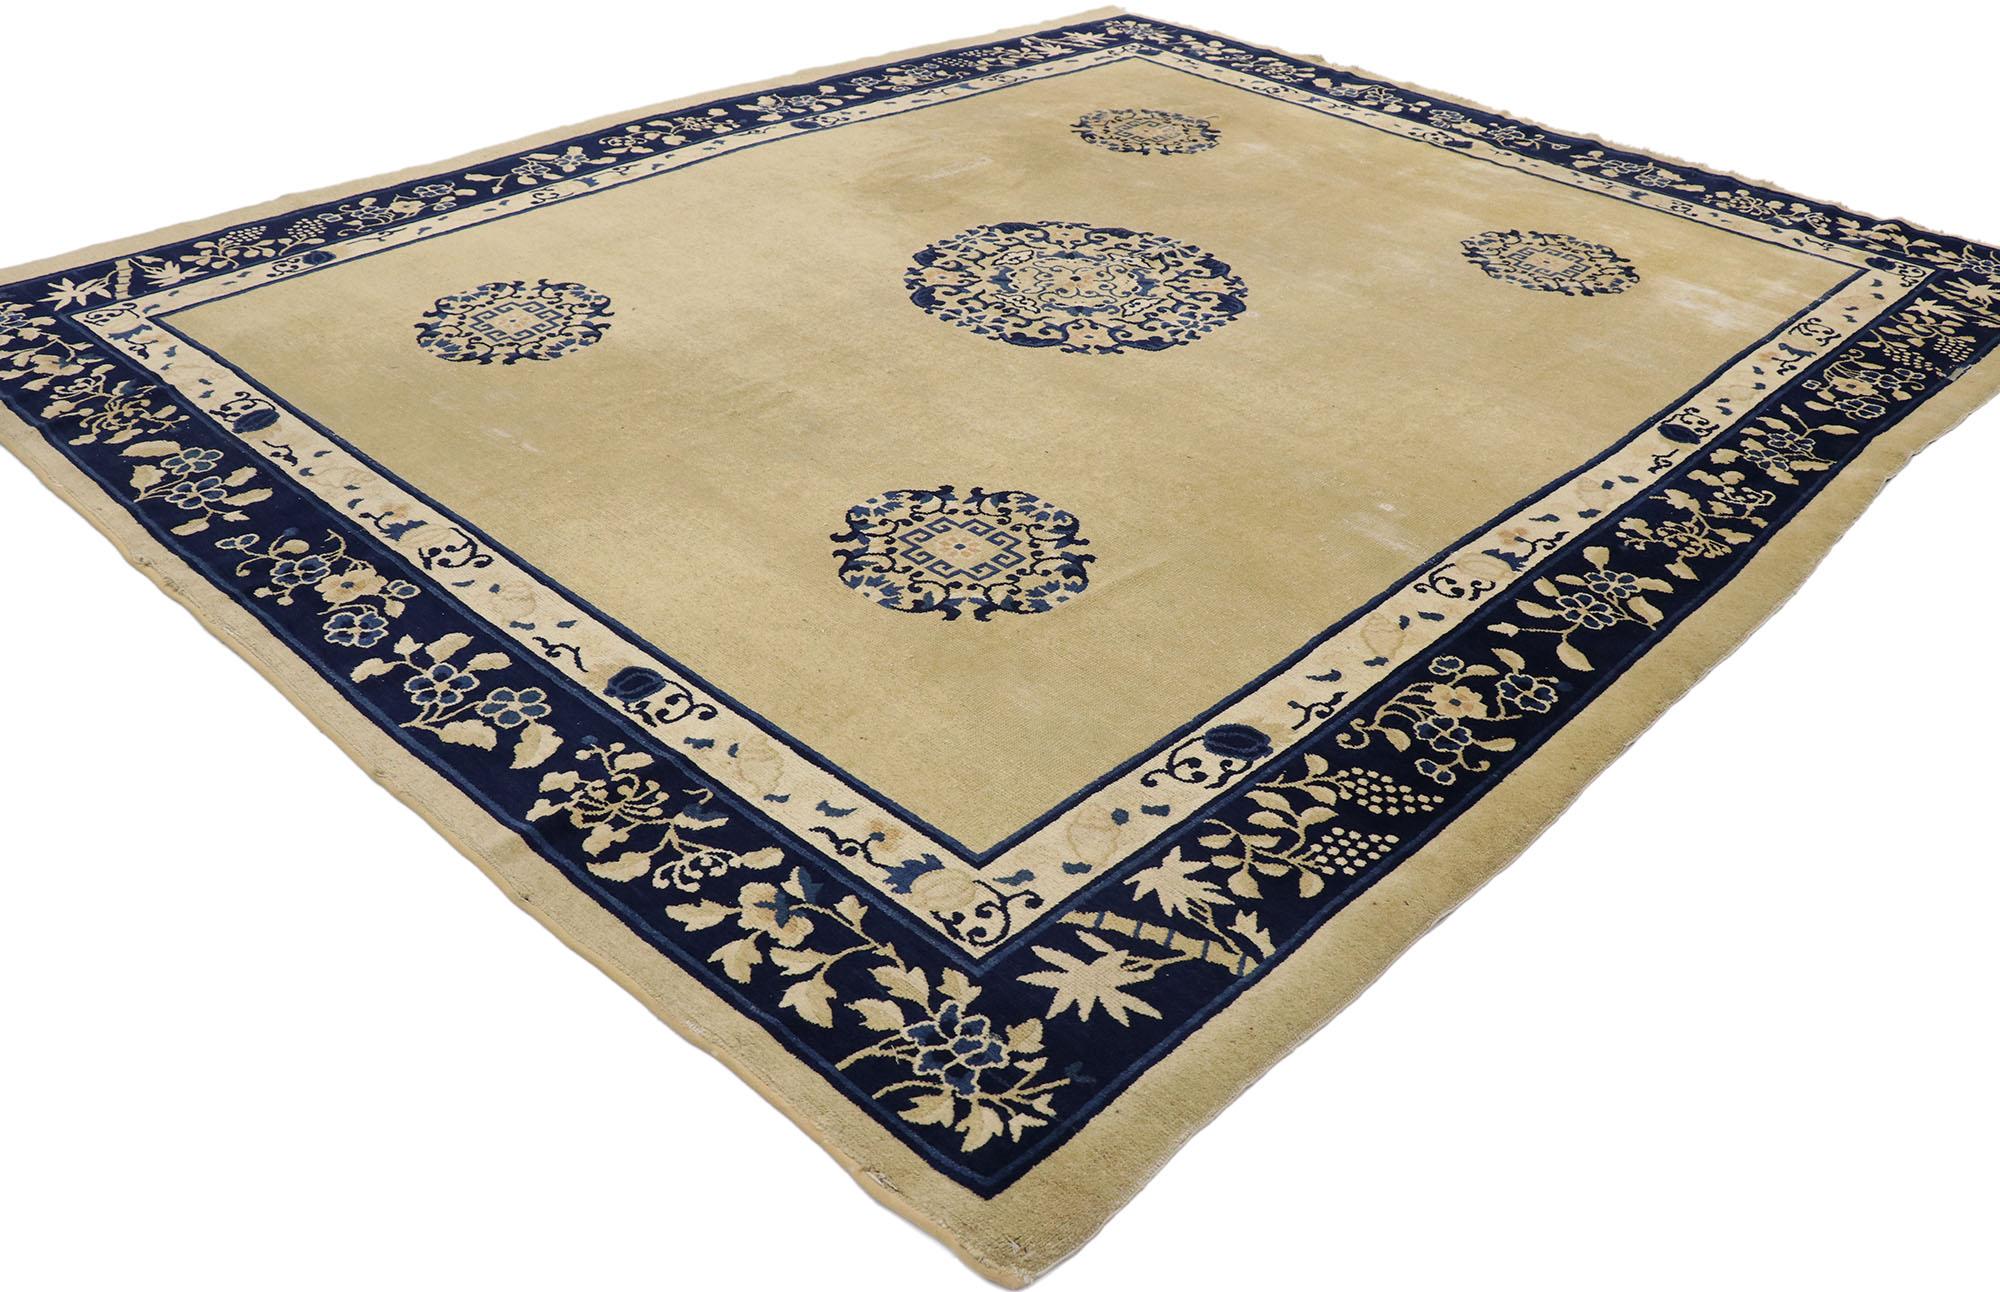 77562, 1880s distressed antique Chinese Peking rug with Classic Victorian style. This hand knotted wool distressed antique Chinese Peking rug features a rounded open center medallion and four corner medallions floating on an abrashed cream field.